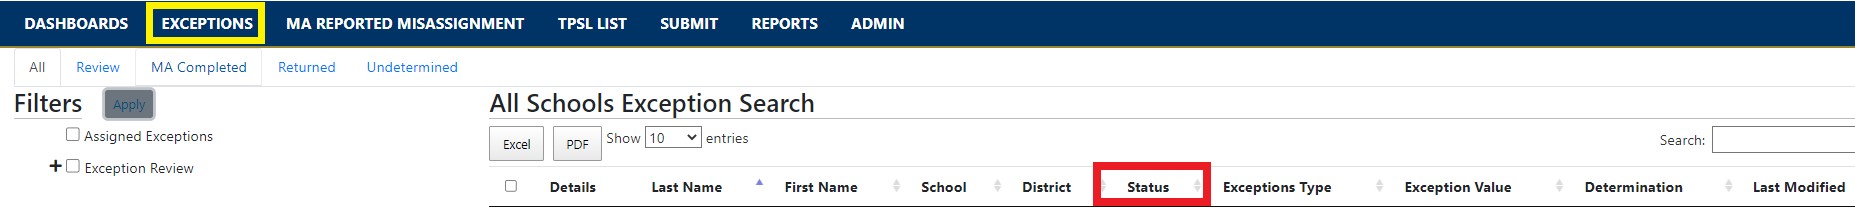 Image of the Exception Screen focusing on the columns at the top of the list of exceptions. The column titles are Details, Last Name, First Name, School, District, Status, Exceptions Type, Exception Value, Determination and Last Modified. The Status column is highlighted.